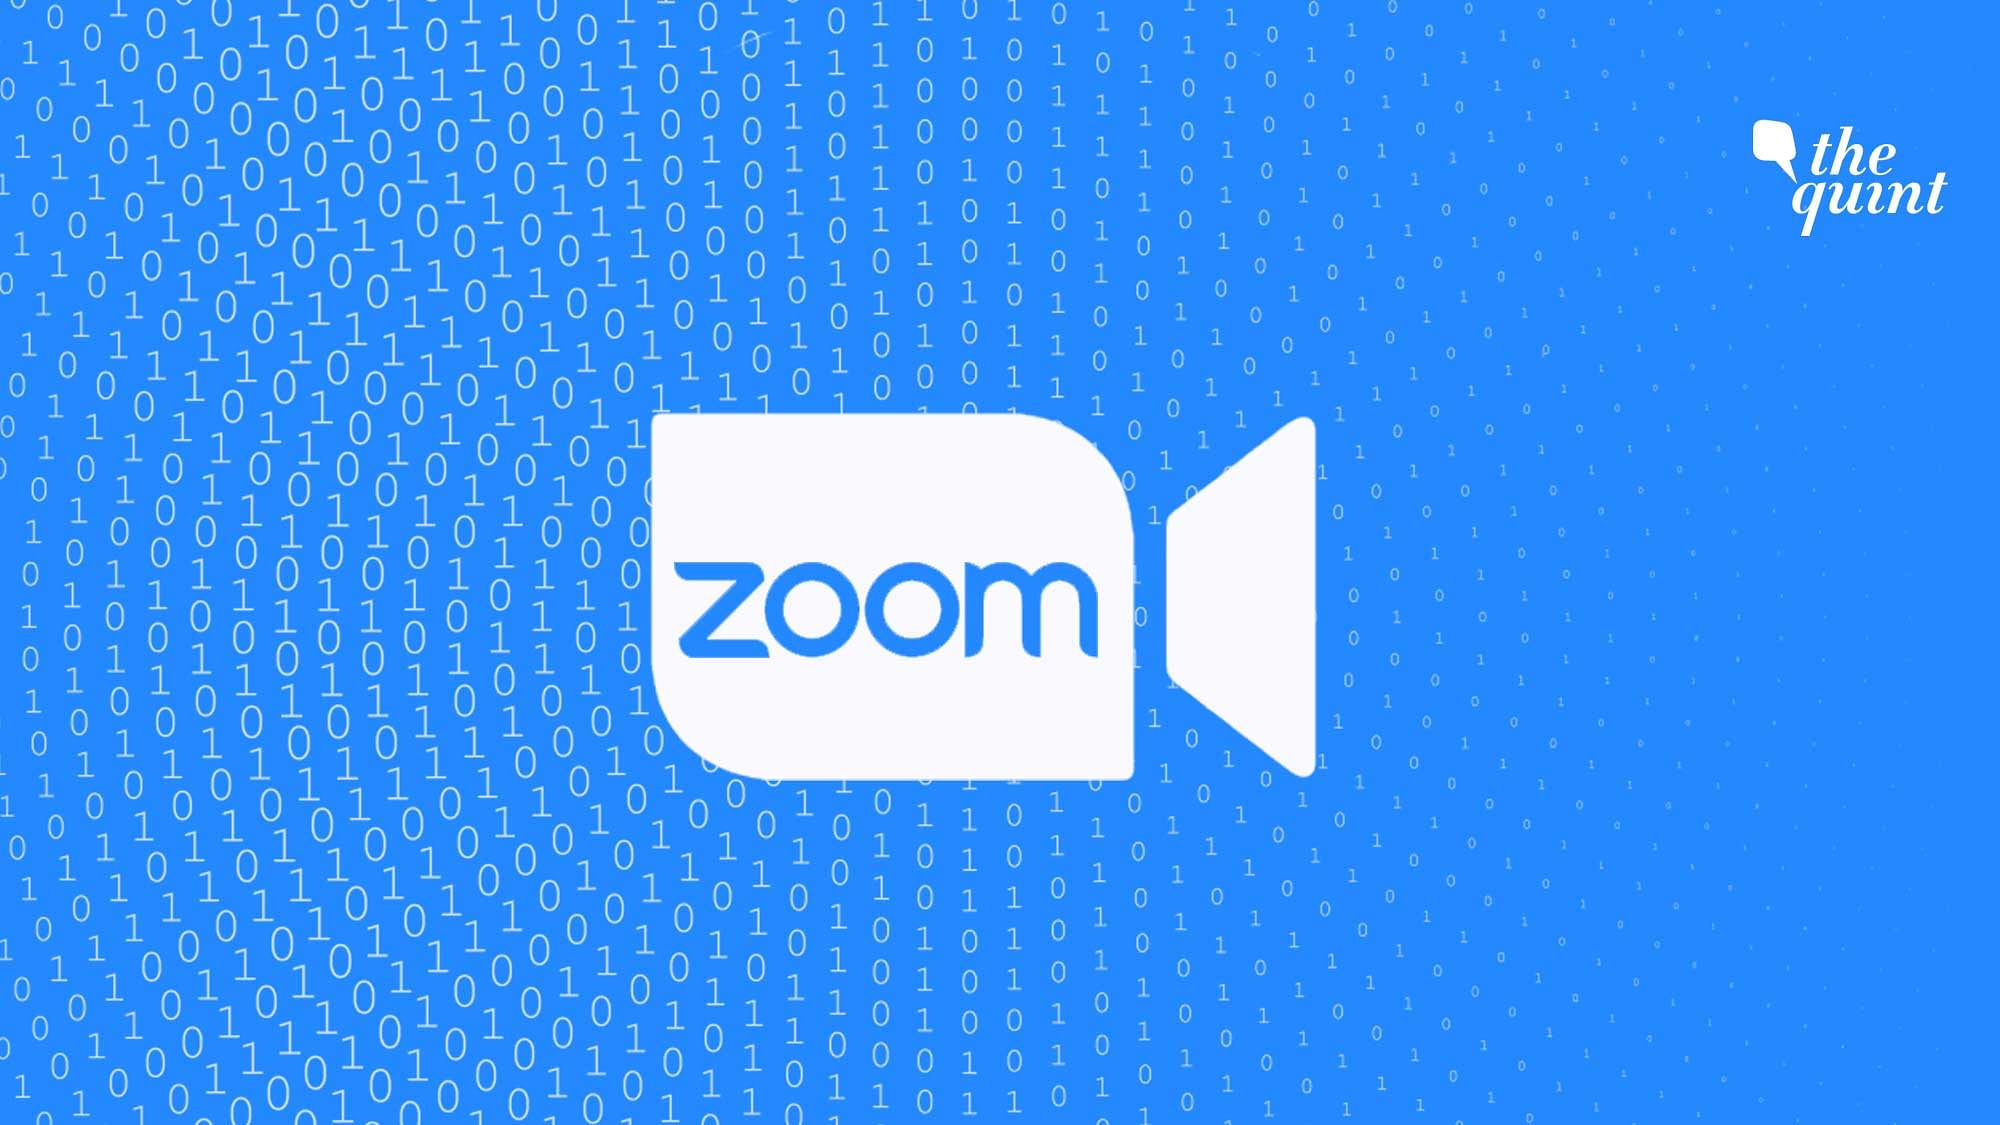 Zoom has been called out for being vulnerable to cyber attacks.